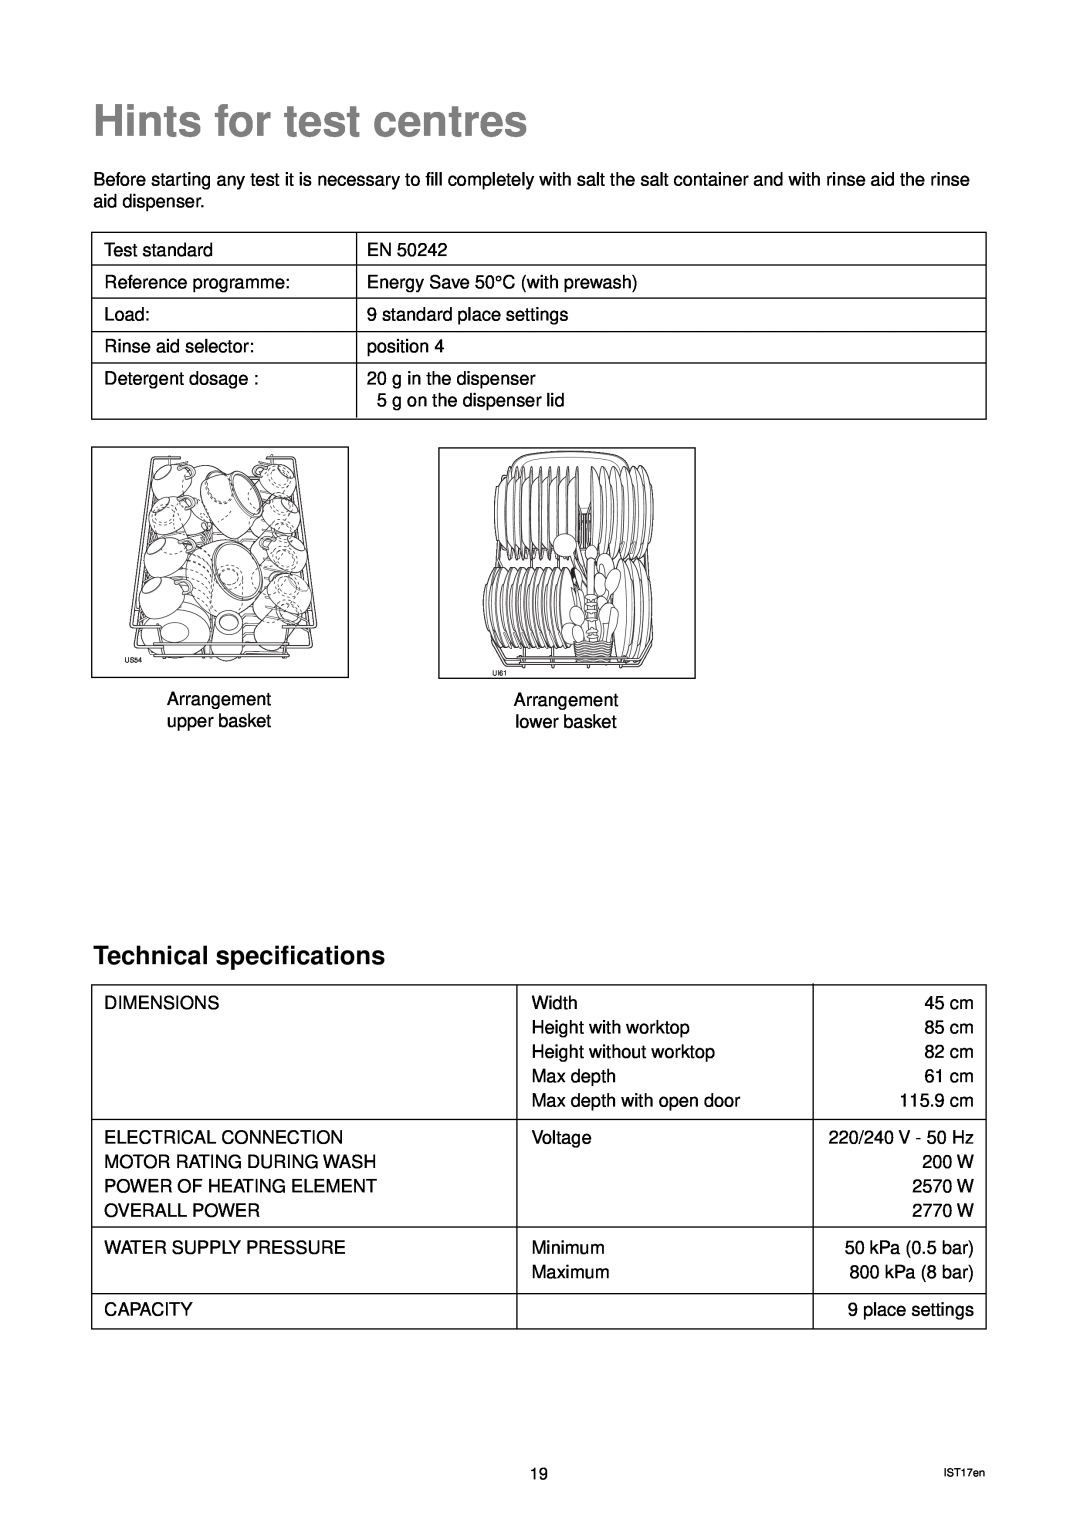 Zanussi DWS 39 manual Hints for test centres, Technical specifications 